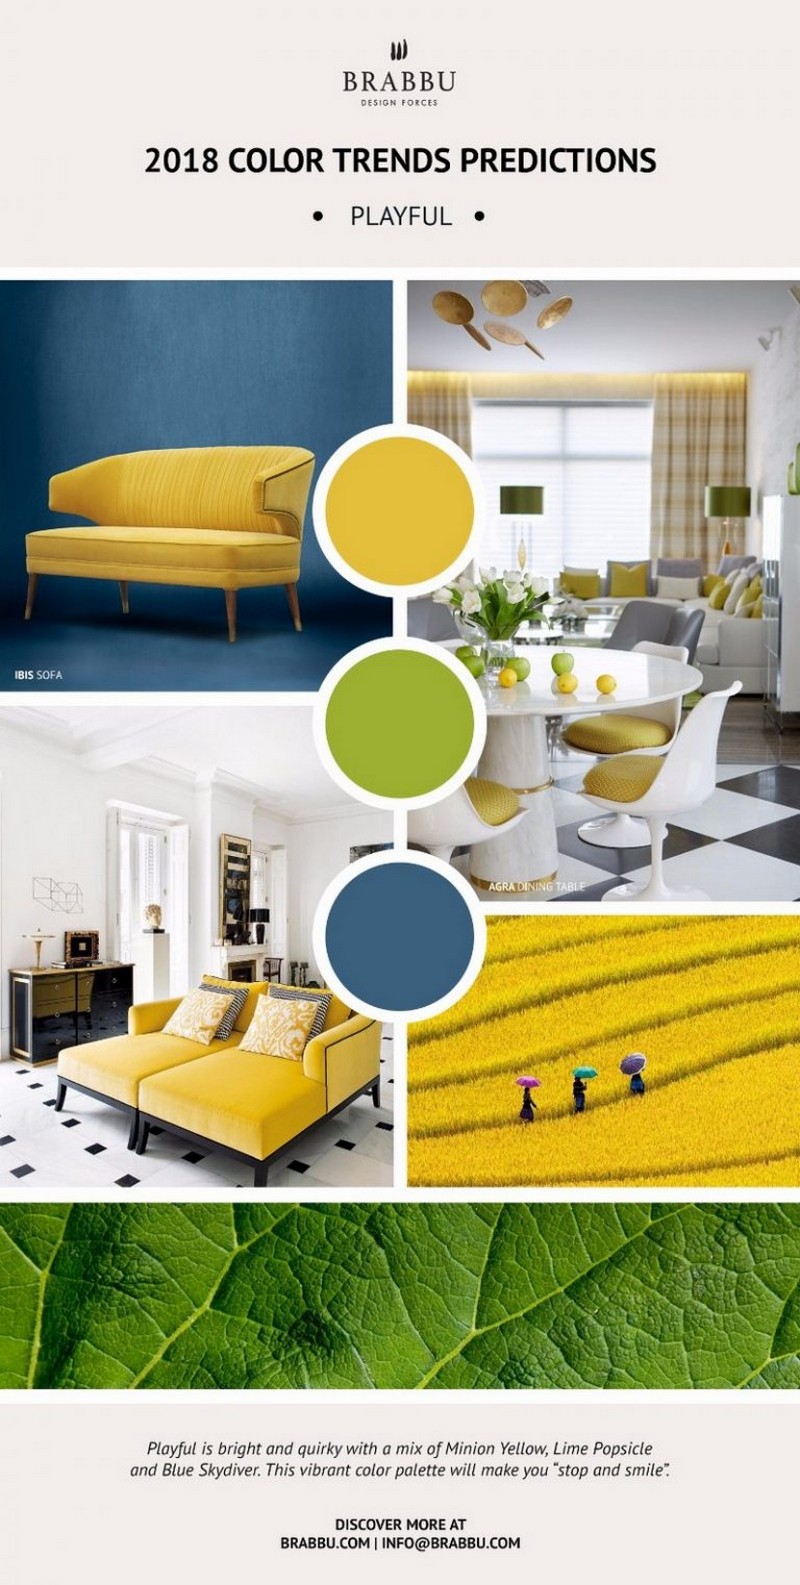 Discover More About Pantone's Color Trend Predictions for 2018 ➤ To see more news about the Interior Design Magazines, subscribe our newsletter right now! #interiordesignmagazines #bestdesignmagazines #interiordesign #designmagazines #pantone #pantone2018 #colorscheme #colorschemeideas @imagazines